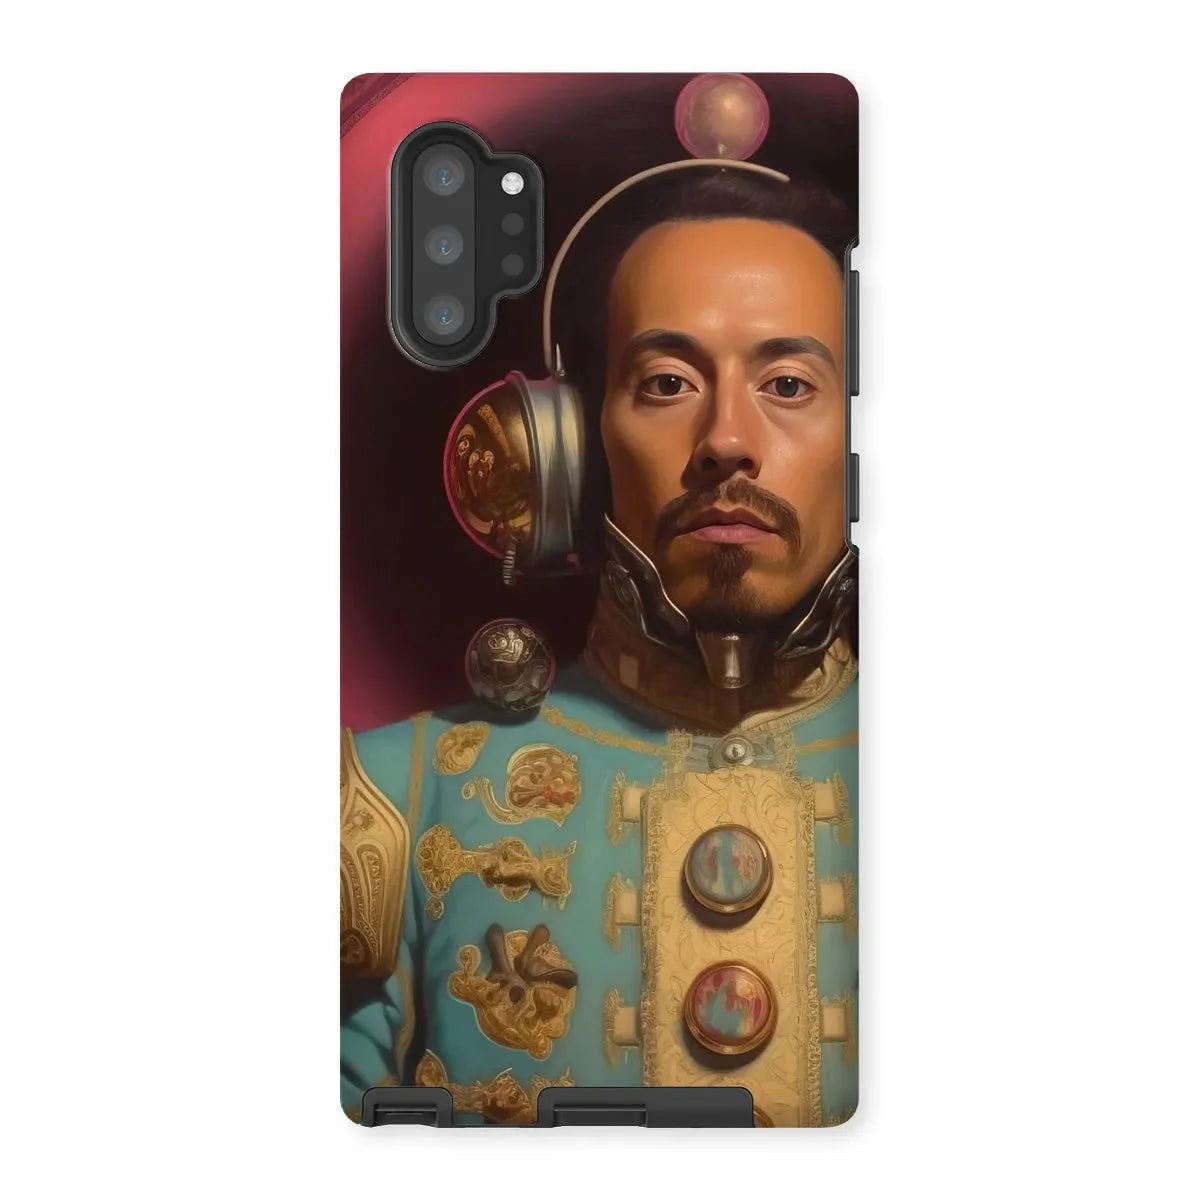 Armando The Gay Astronaut - Queercore Aesthetic Phone Case - Samsung Galaxy Note 10p / Matte - Mobile Phone Cases